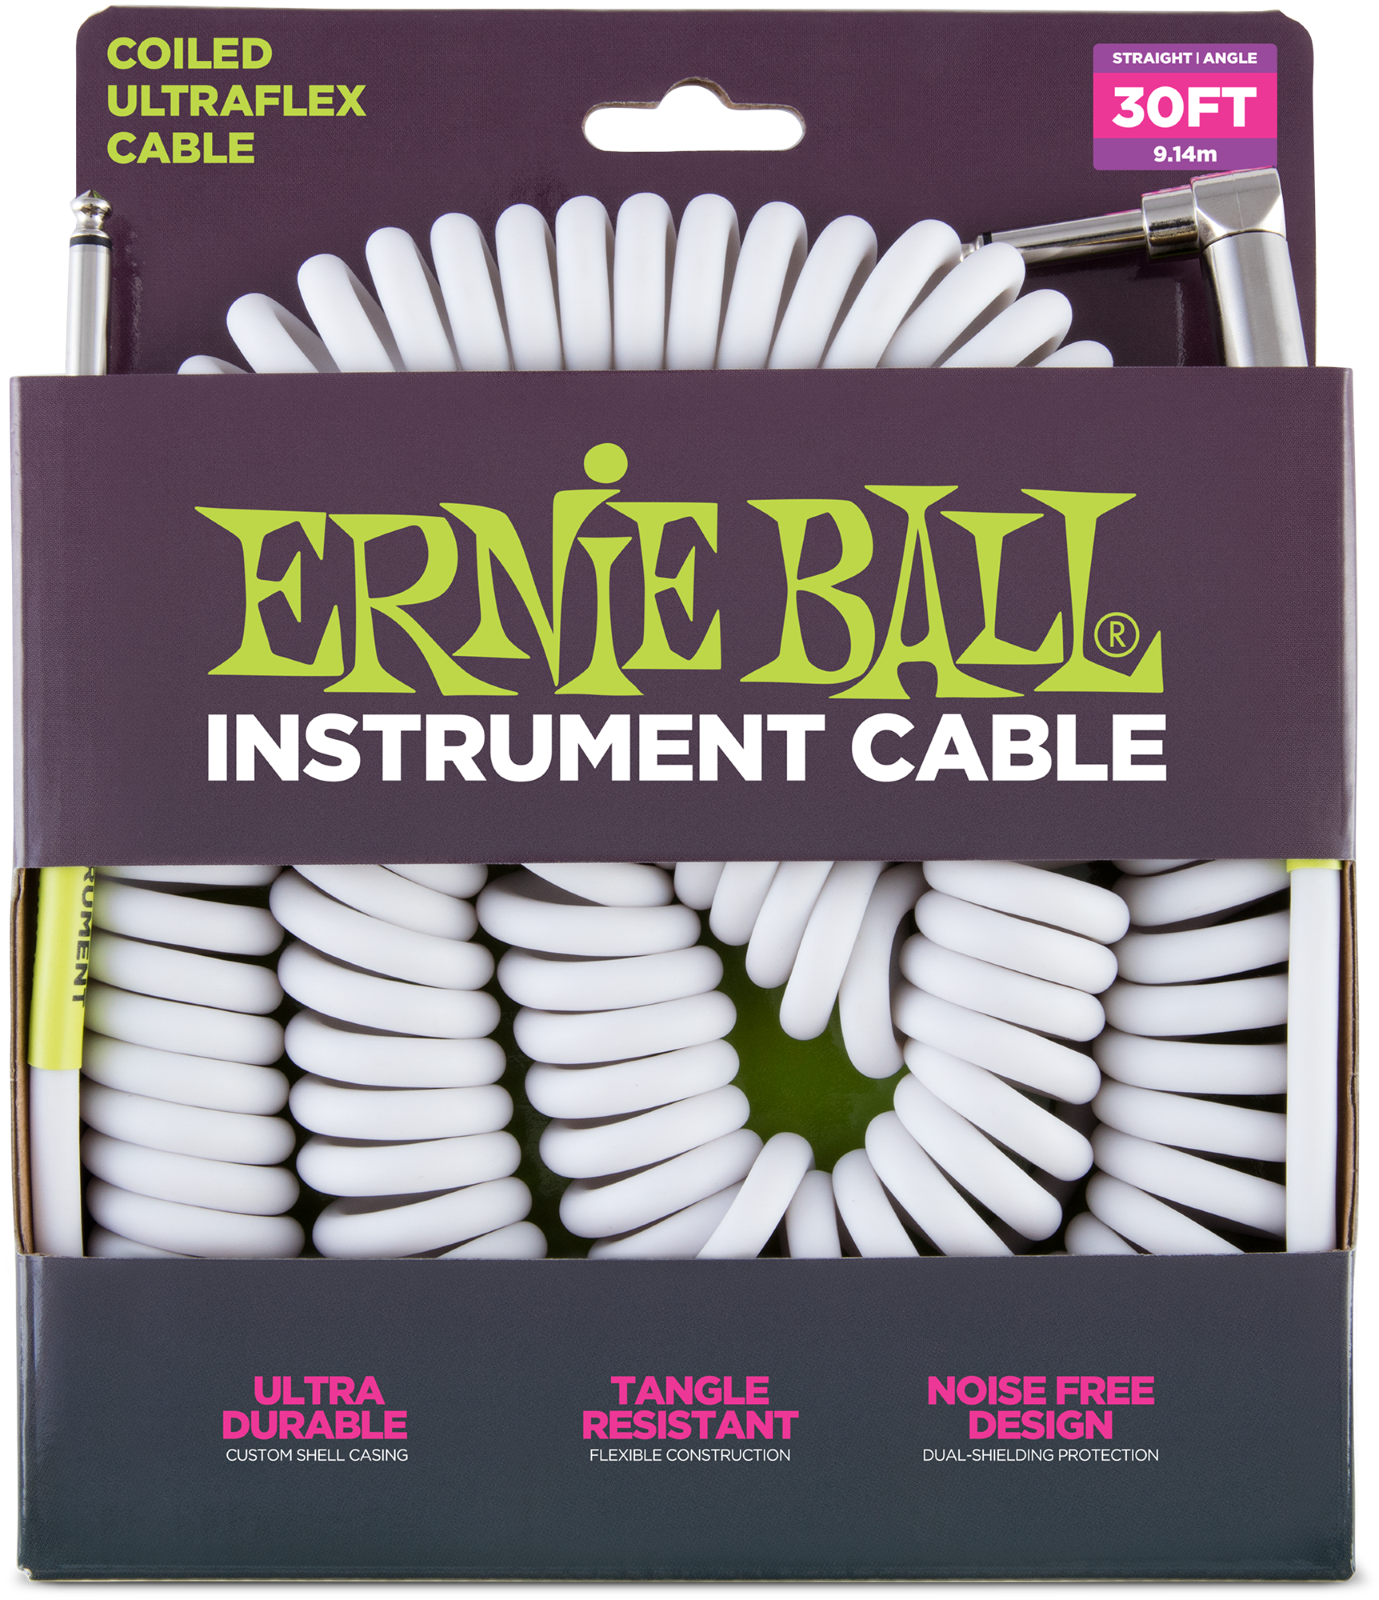 Ernie Ball Spiral Cable Straight / Angled, White, 9.14m : photo 1